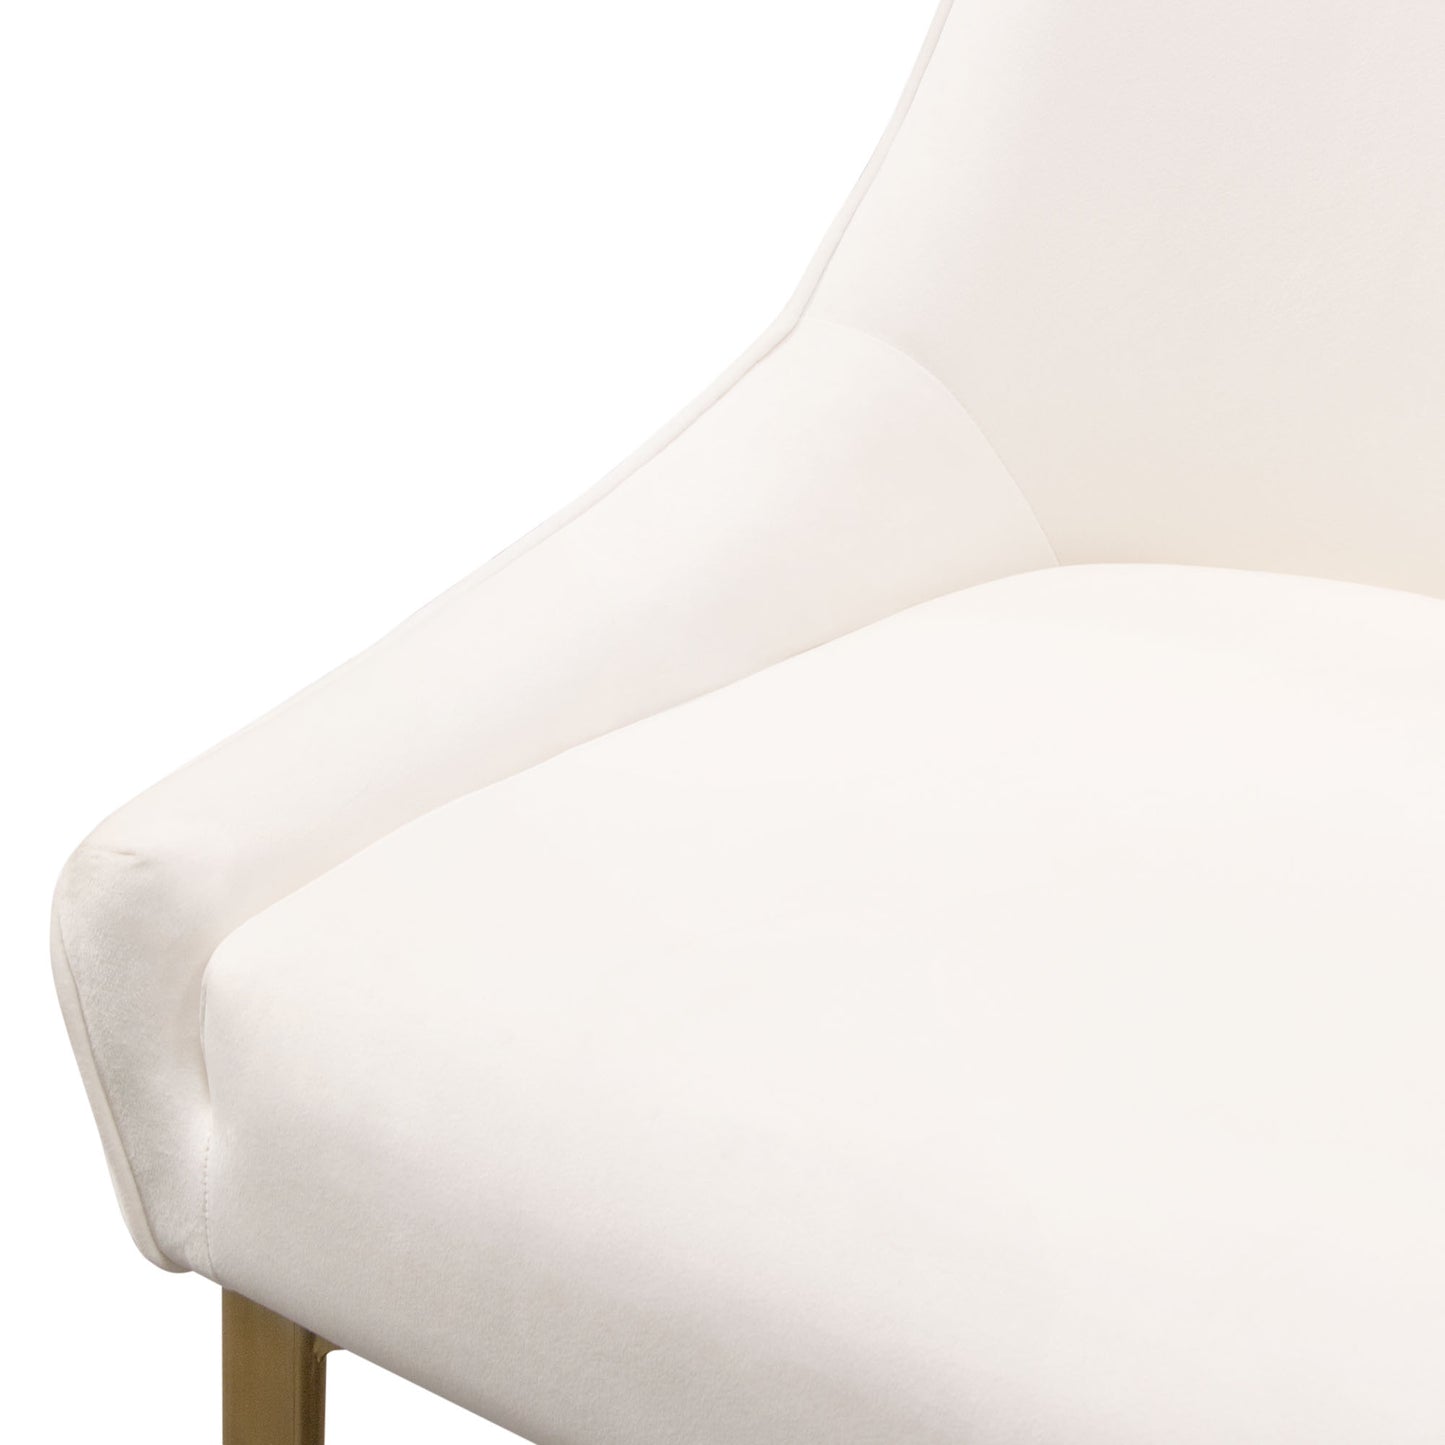 Quinn Set of Two Dining Chairs in Cream Velvet w/ Brushed Gold Metal Leg